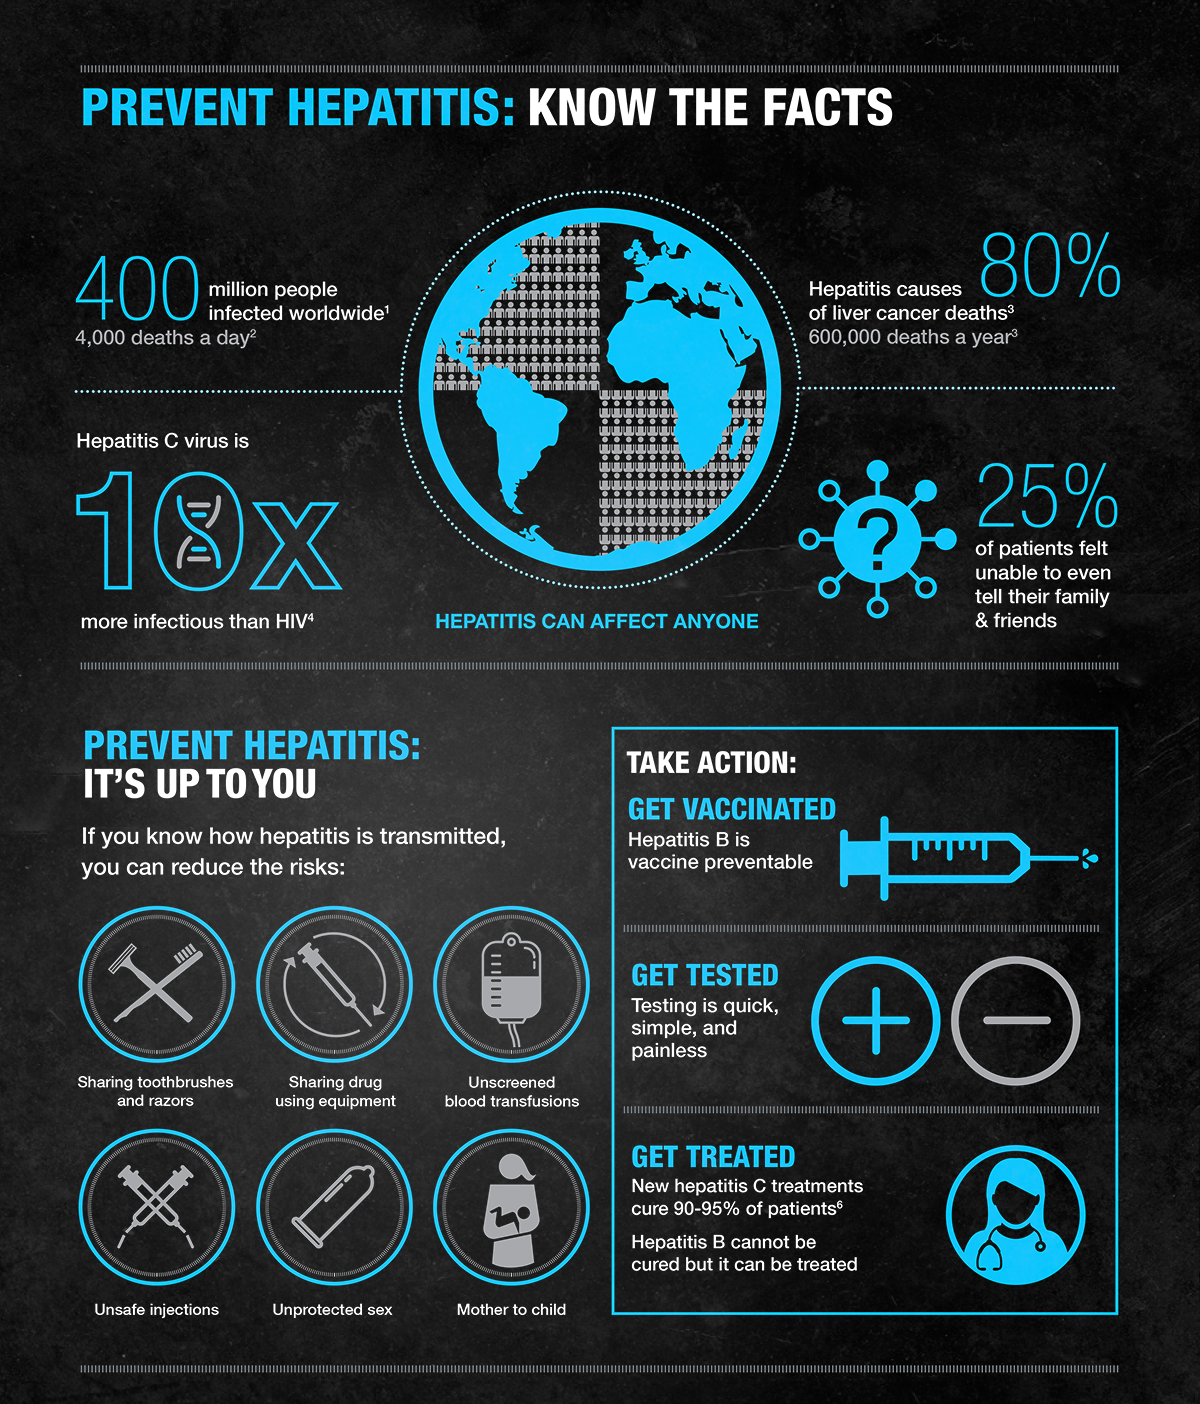 Prevent Hepatitis - Know the Facts